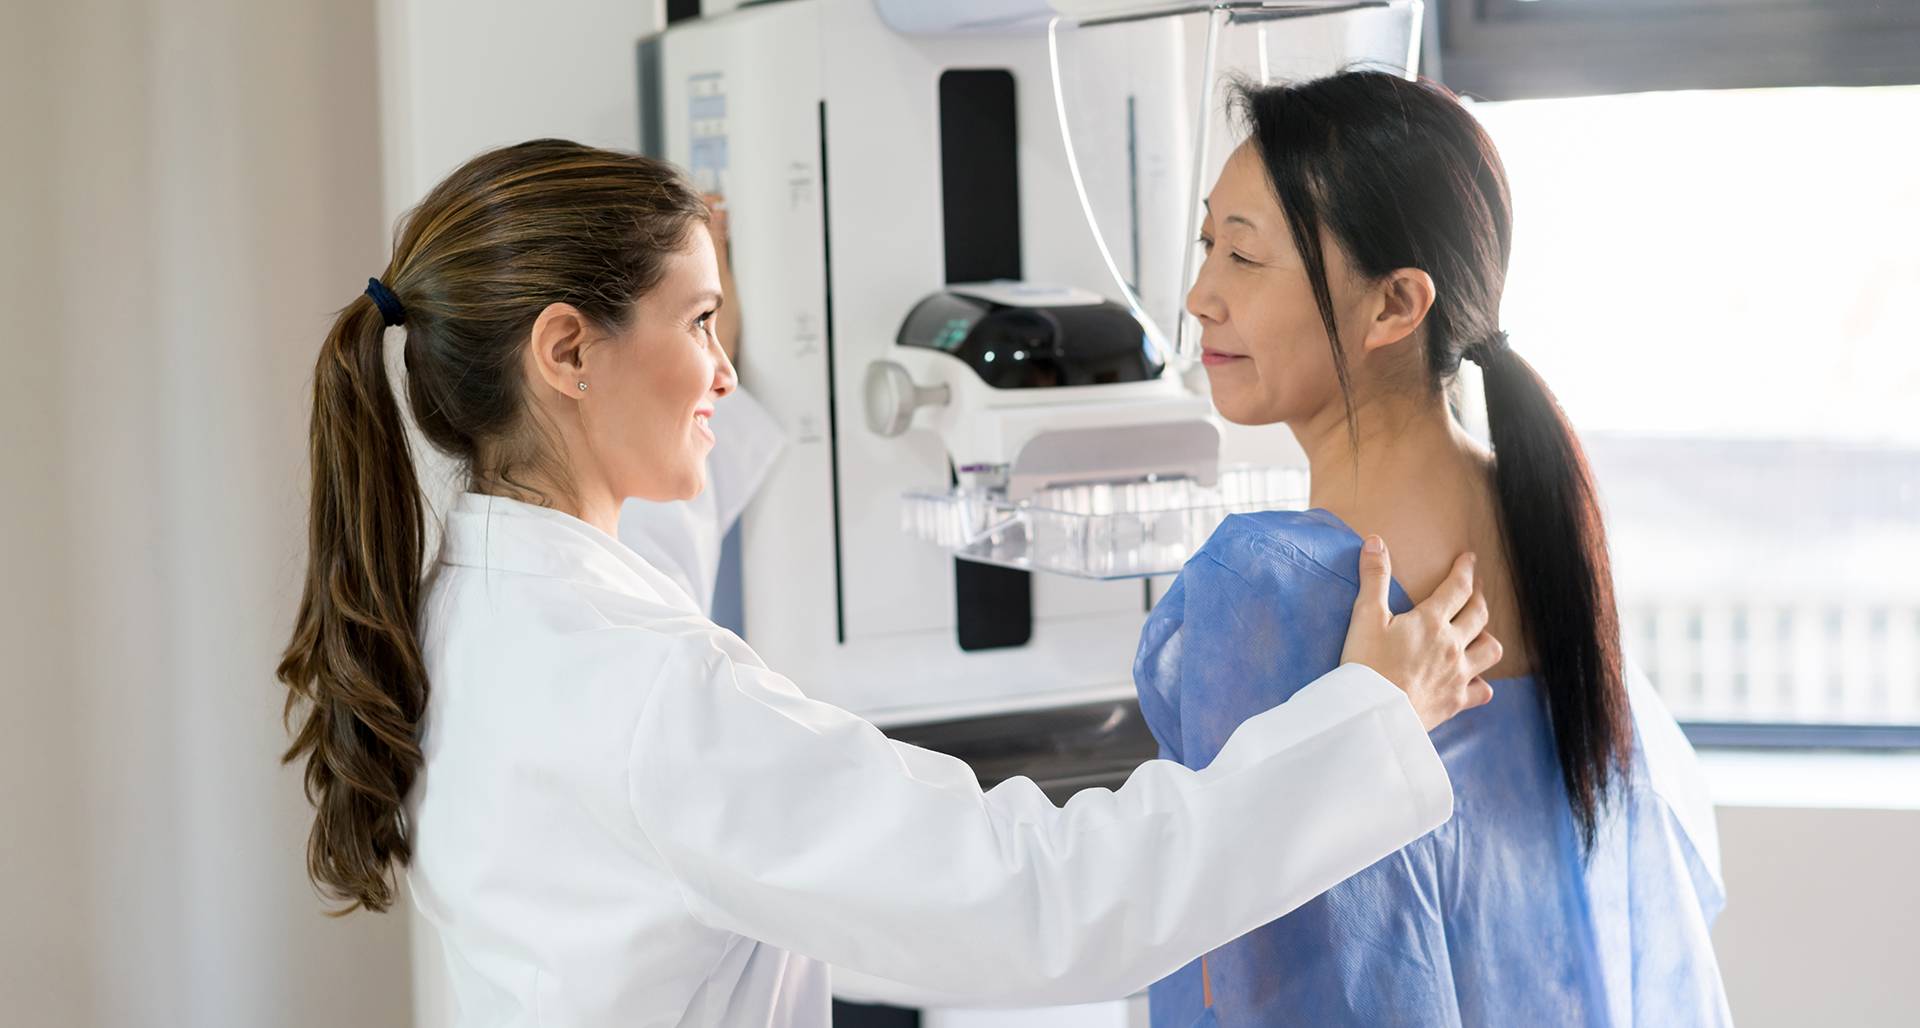 health-care professional guiding woman through medical imaging procedure